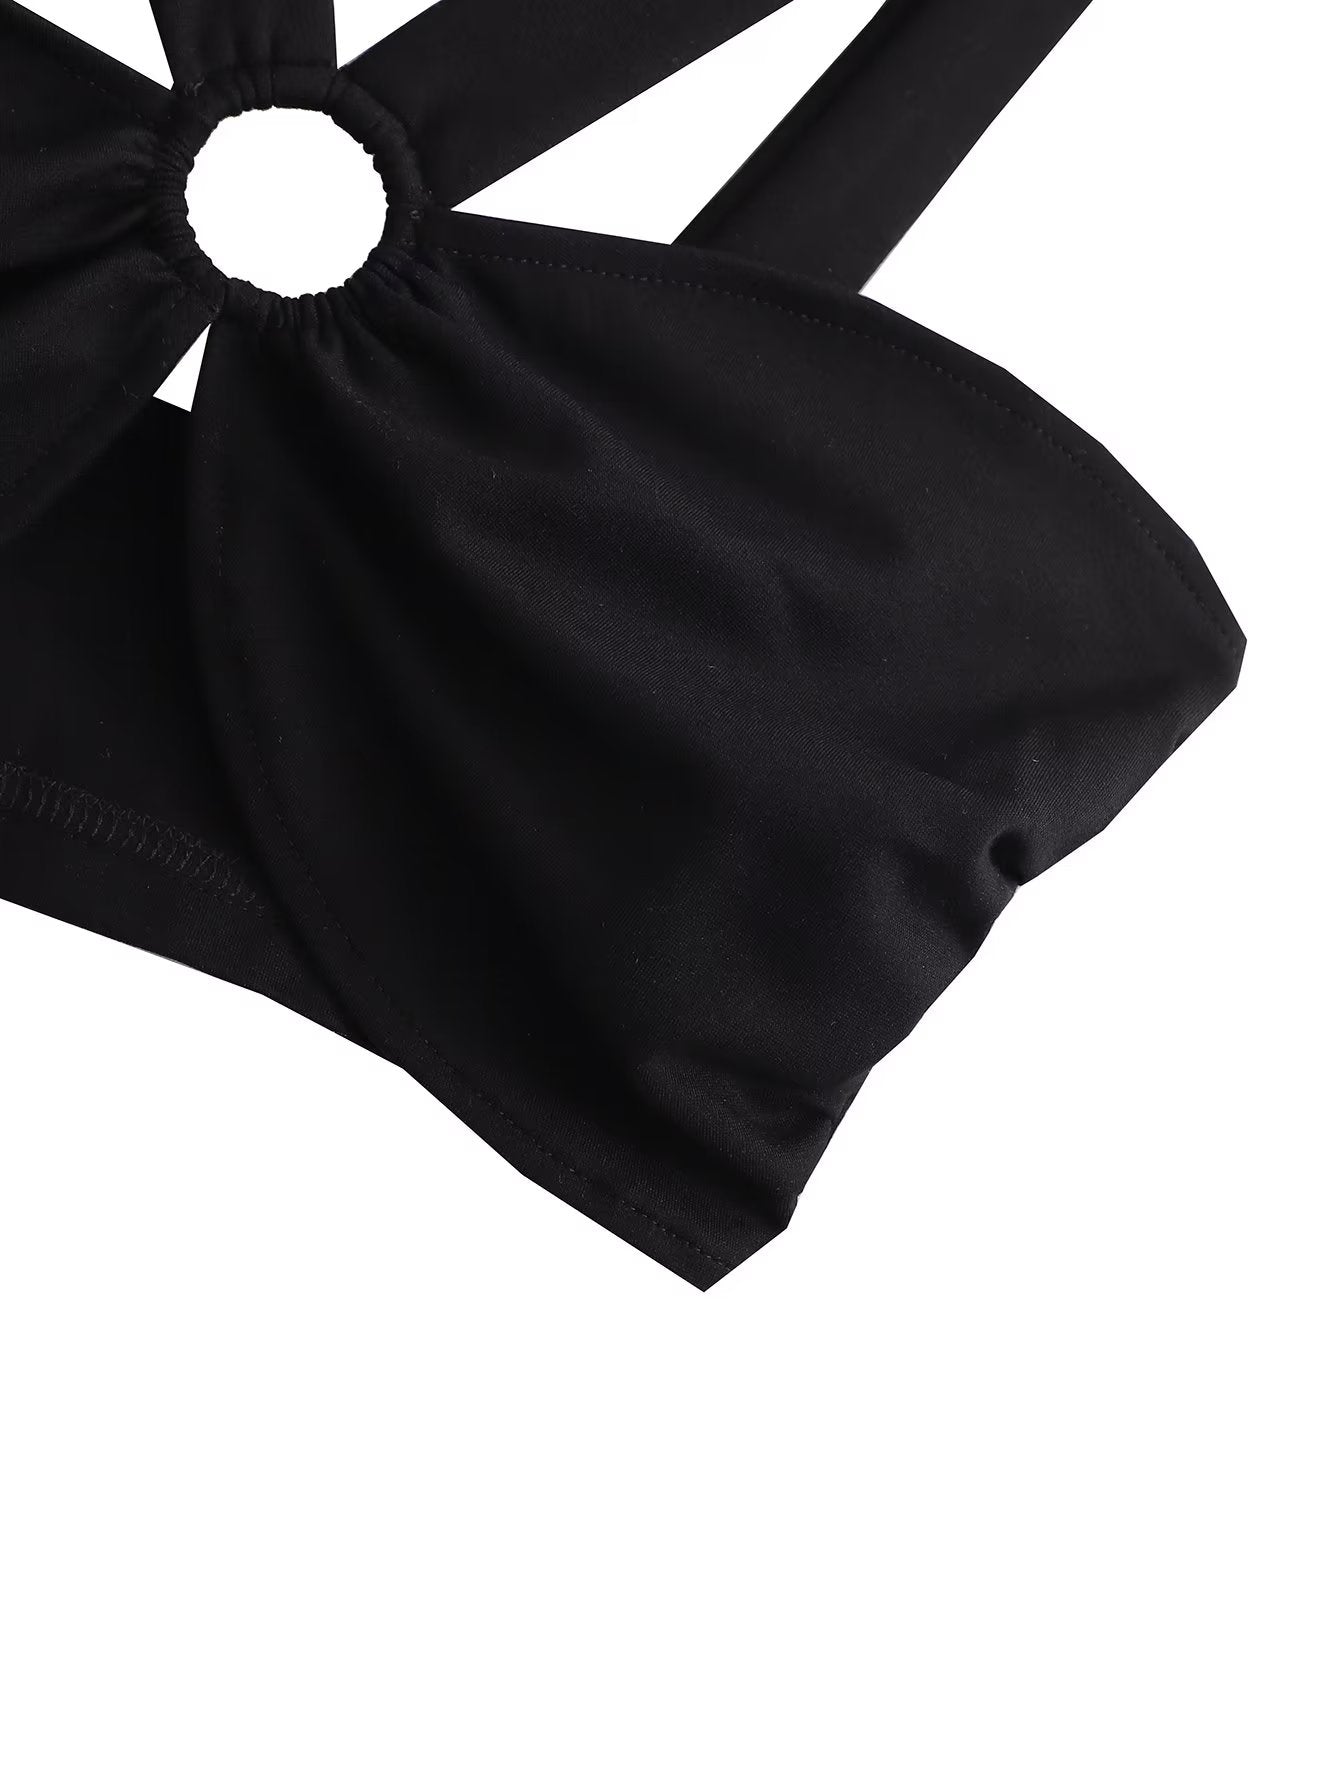 Sexy Backless Cropped Halter Bow Collar Tube Top Short Type Top